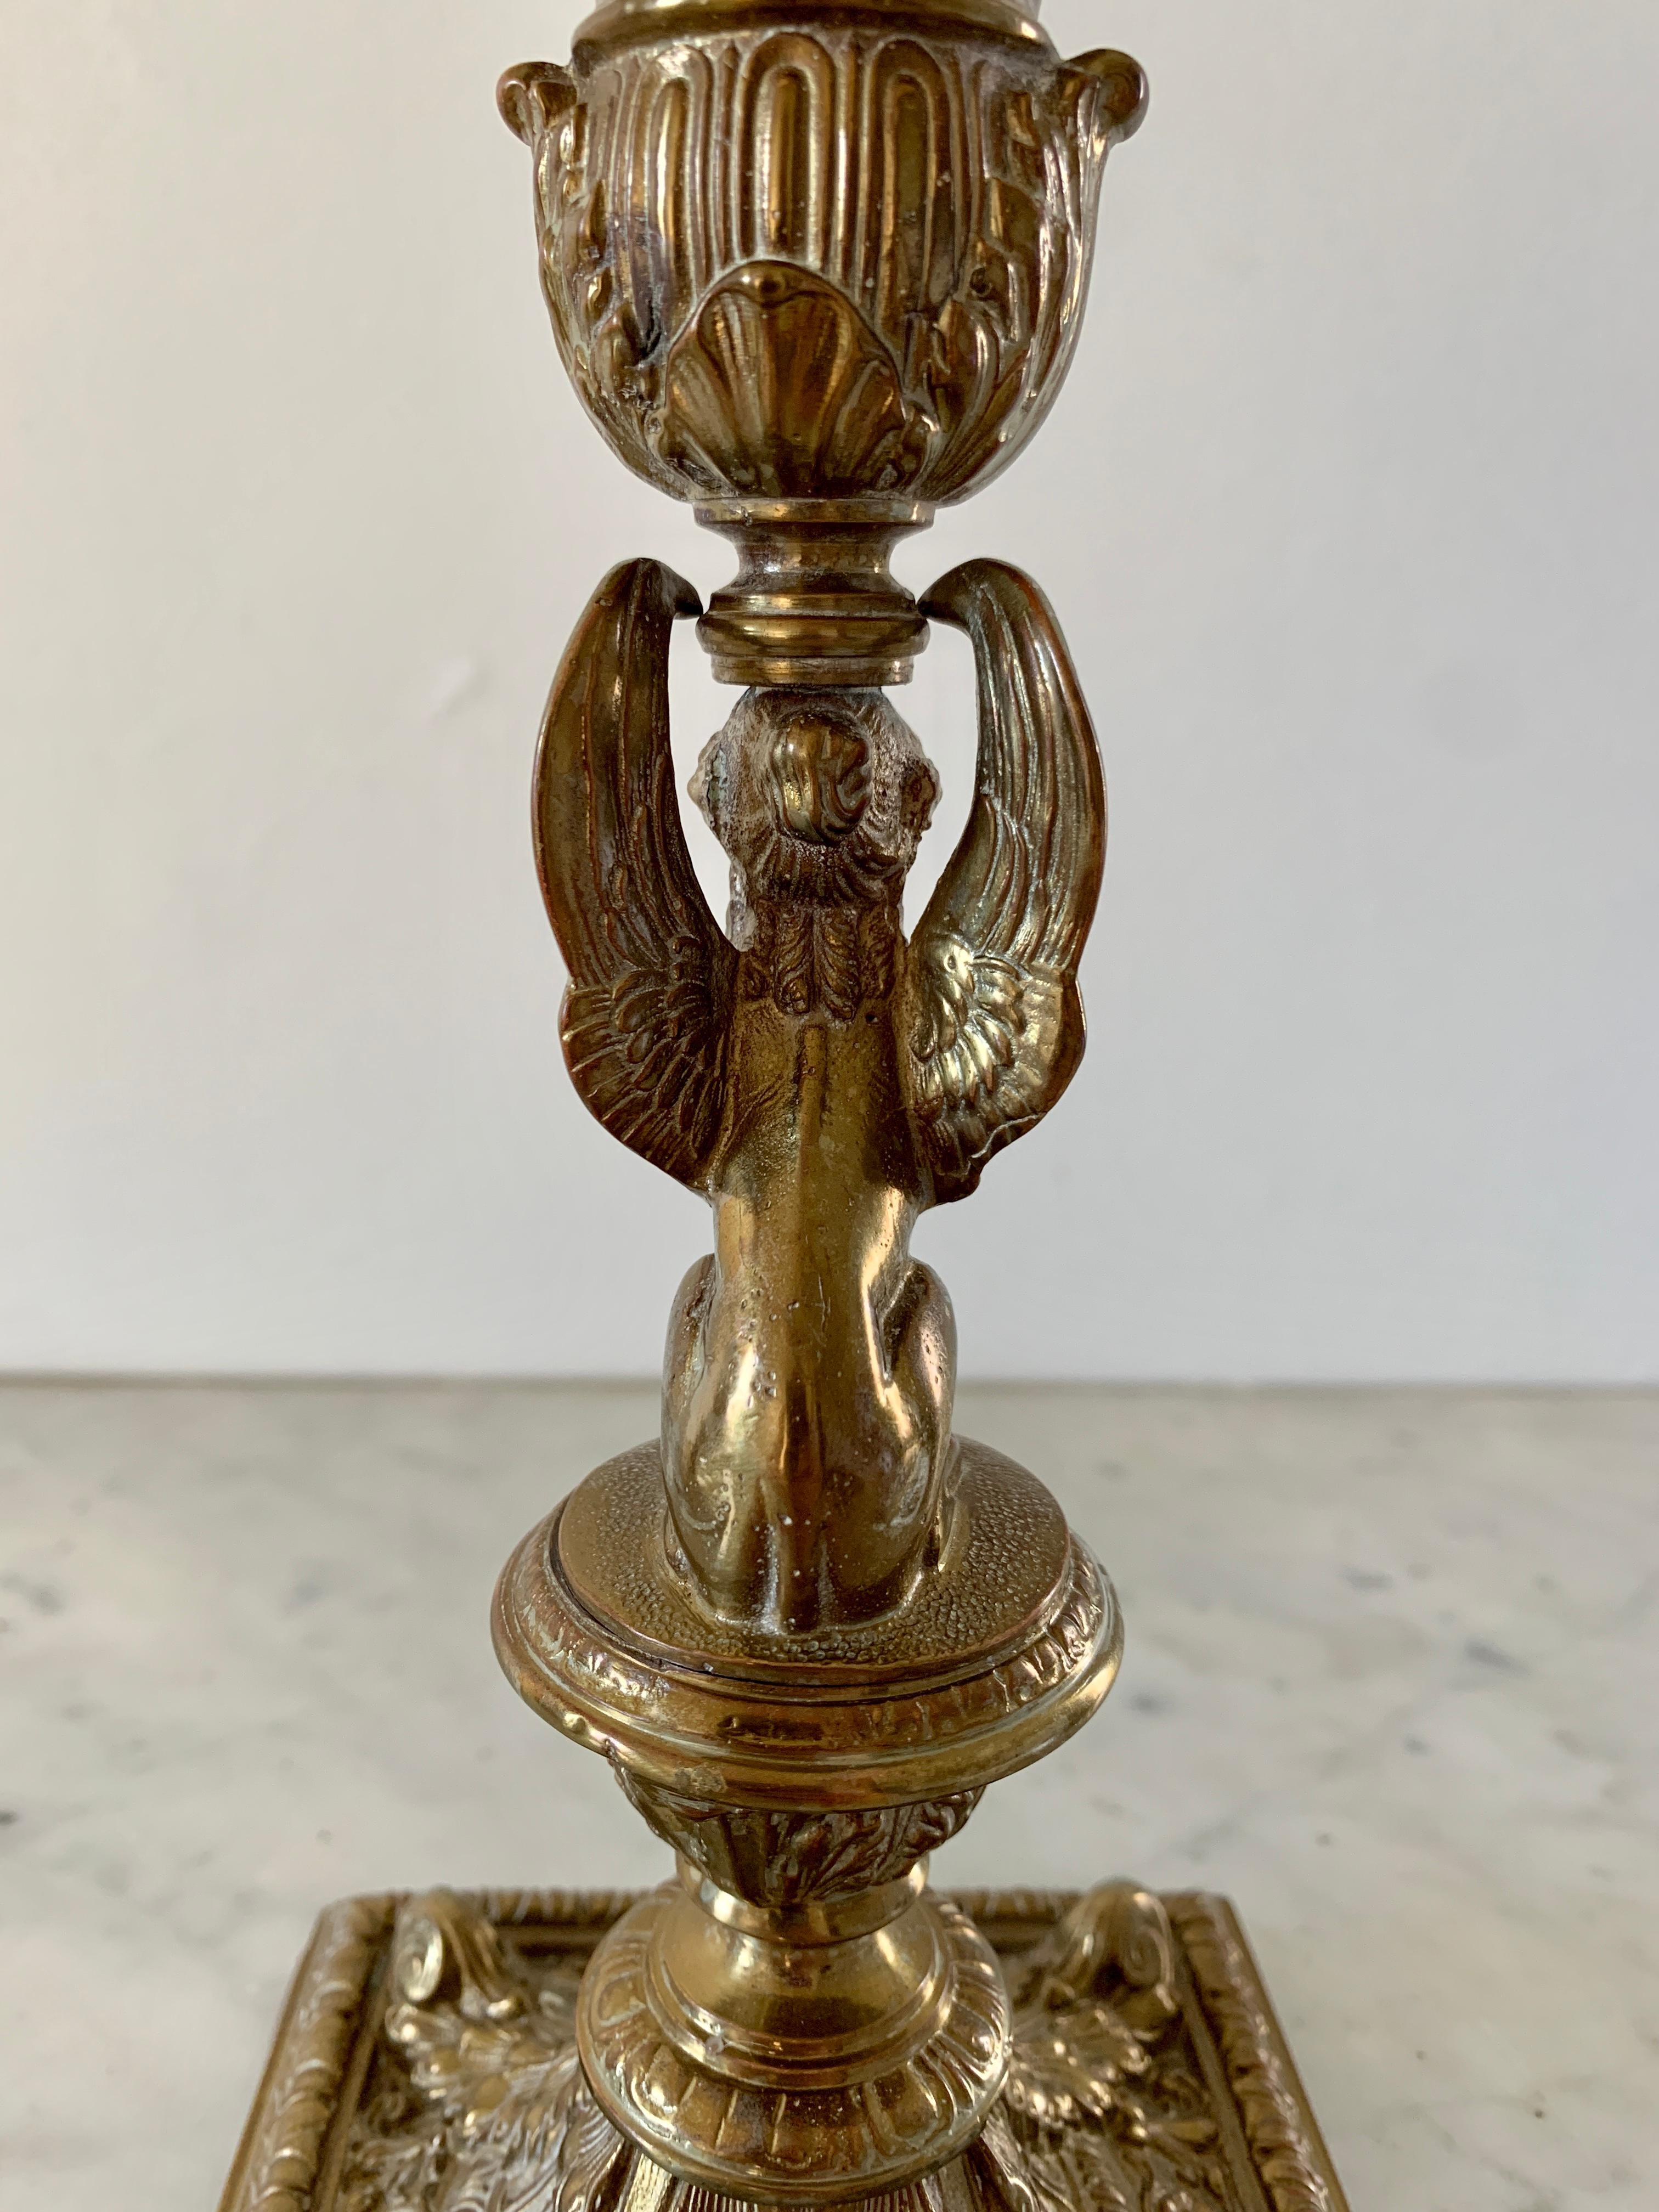 19th Century Egyptian Revival Gilt Bronze Sphinx Candlestick Holders, Pair For Sale 7